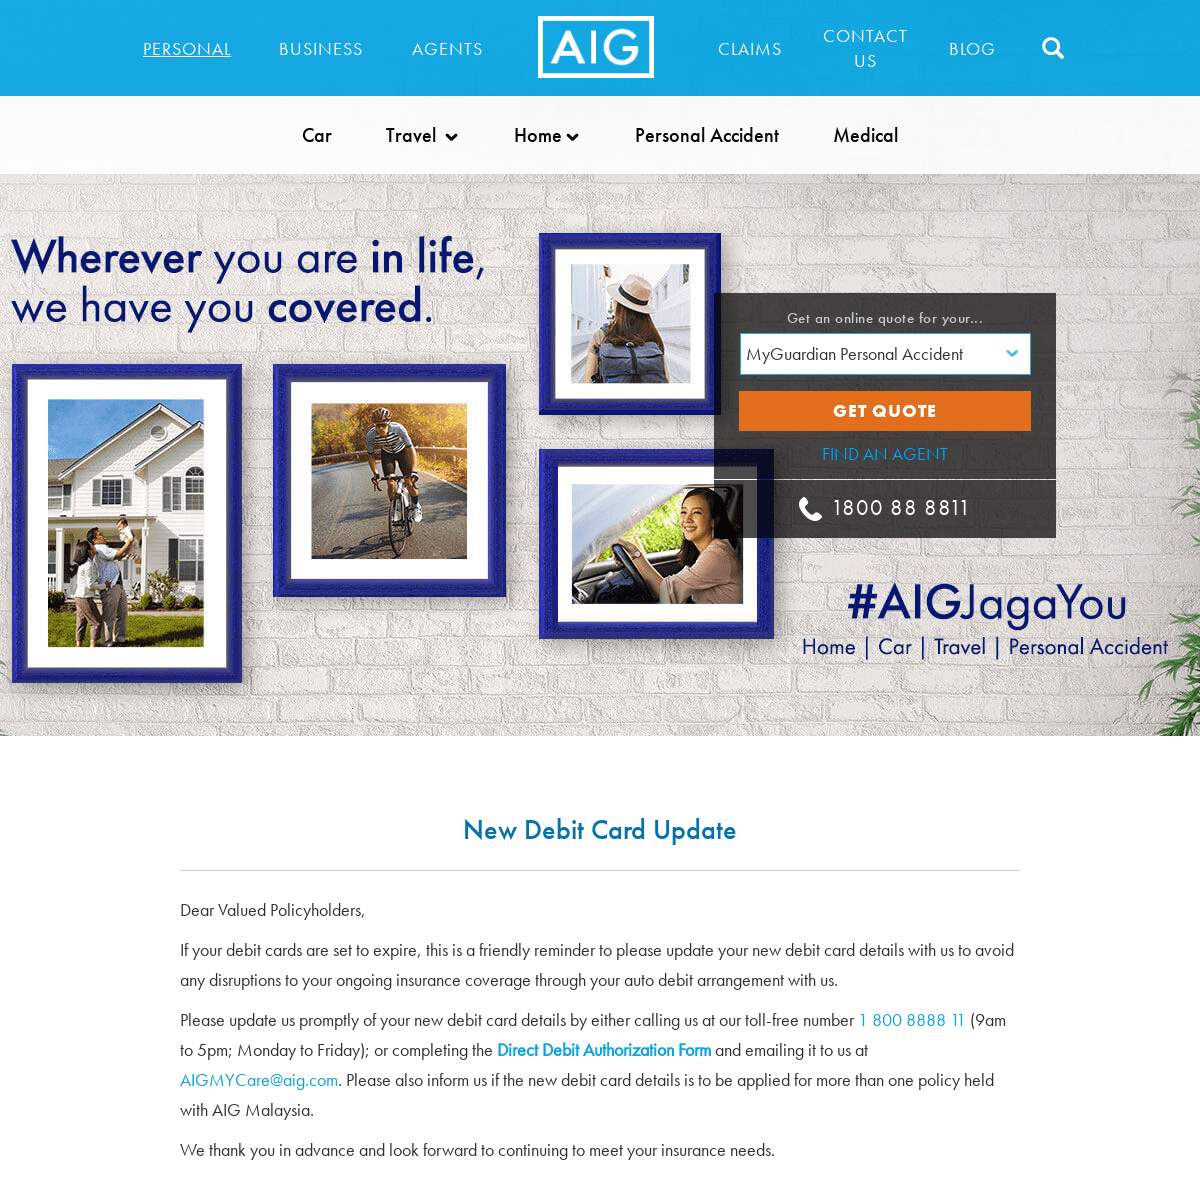 A complete backup of https://aig.my